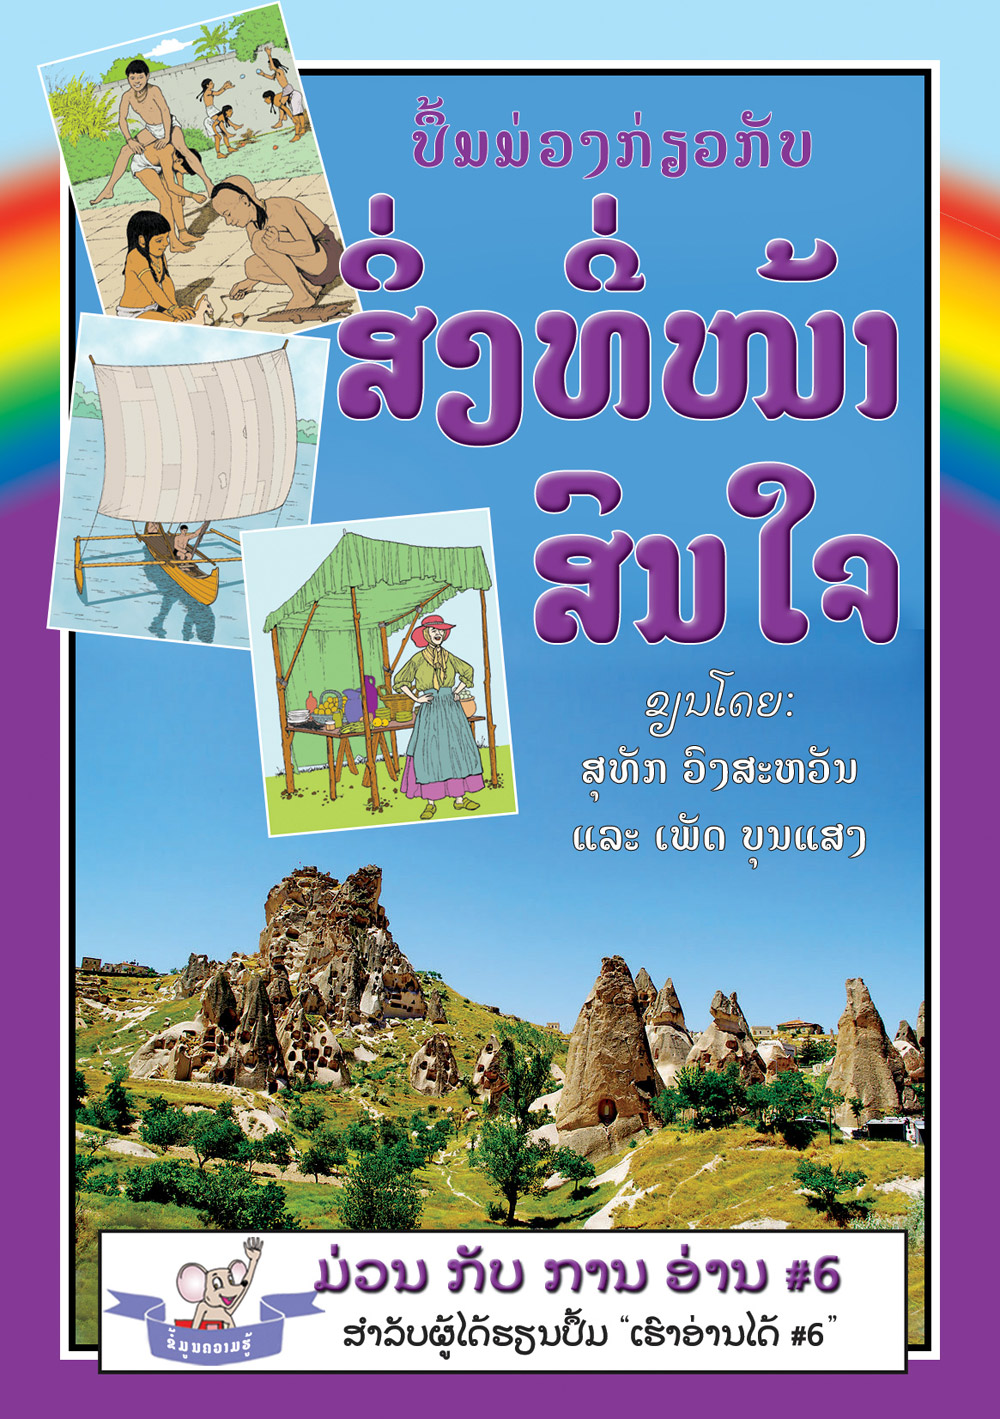 The Purple Book of Interesting Facts large book cover, published in Lao language